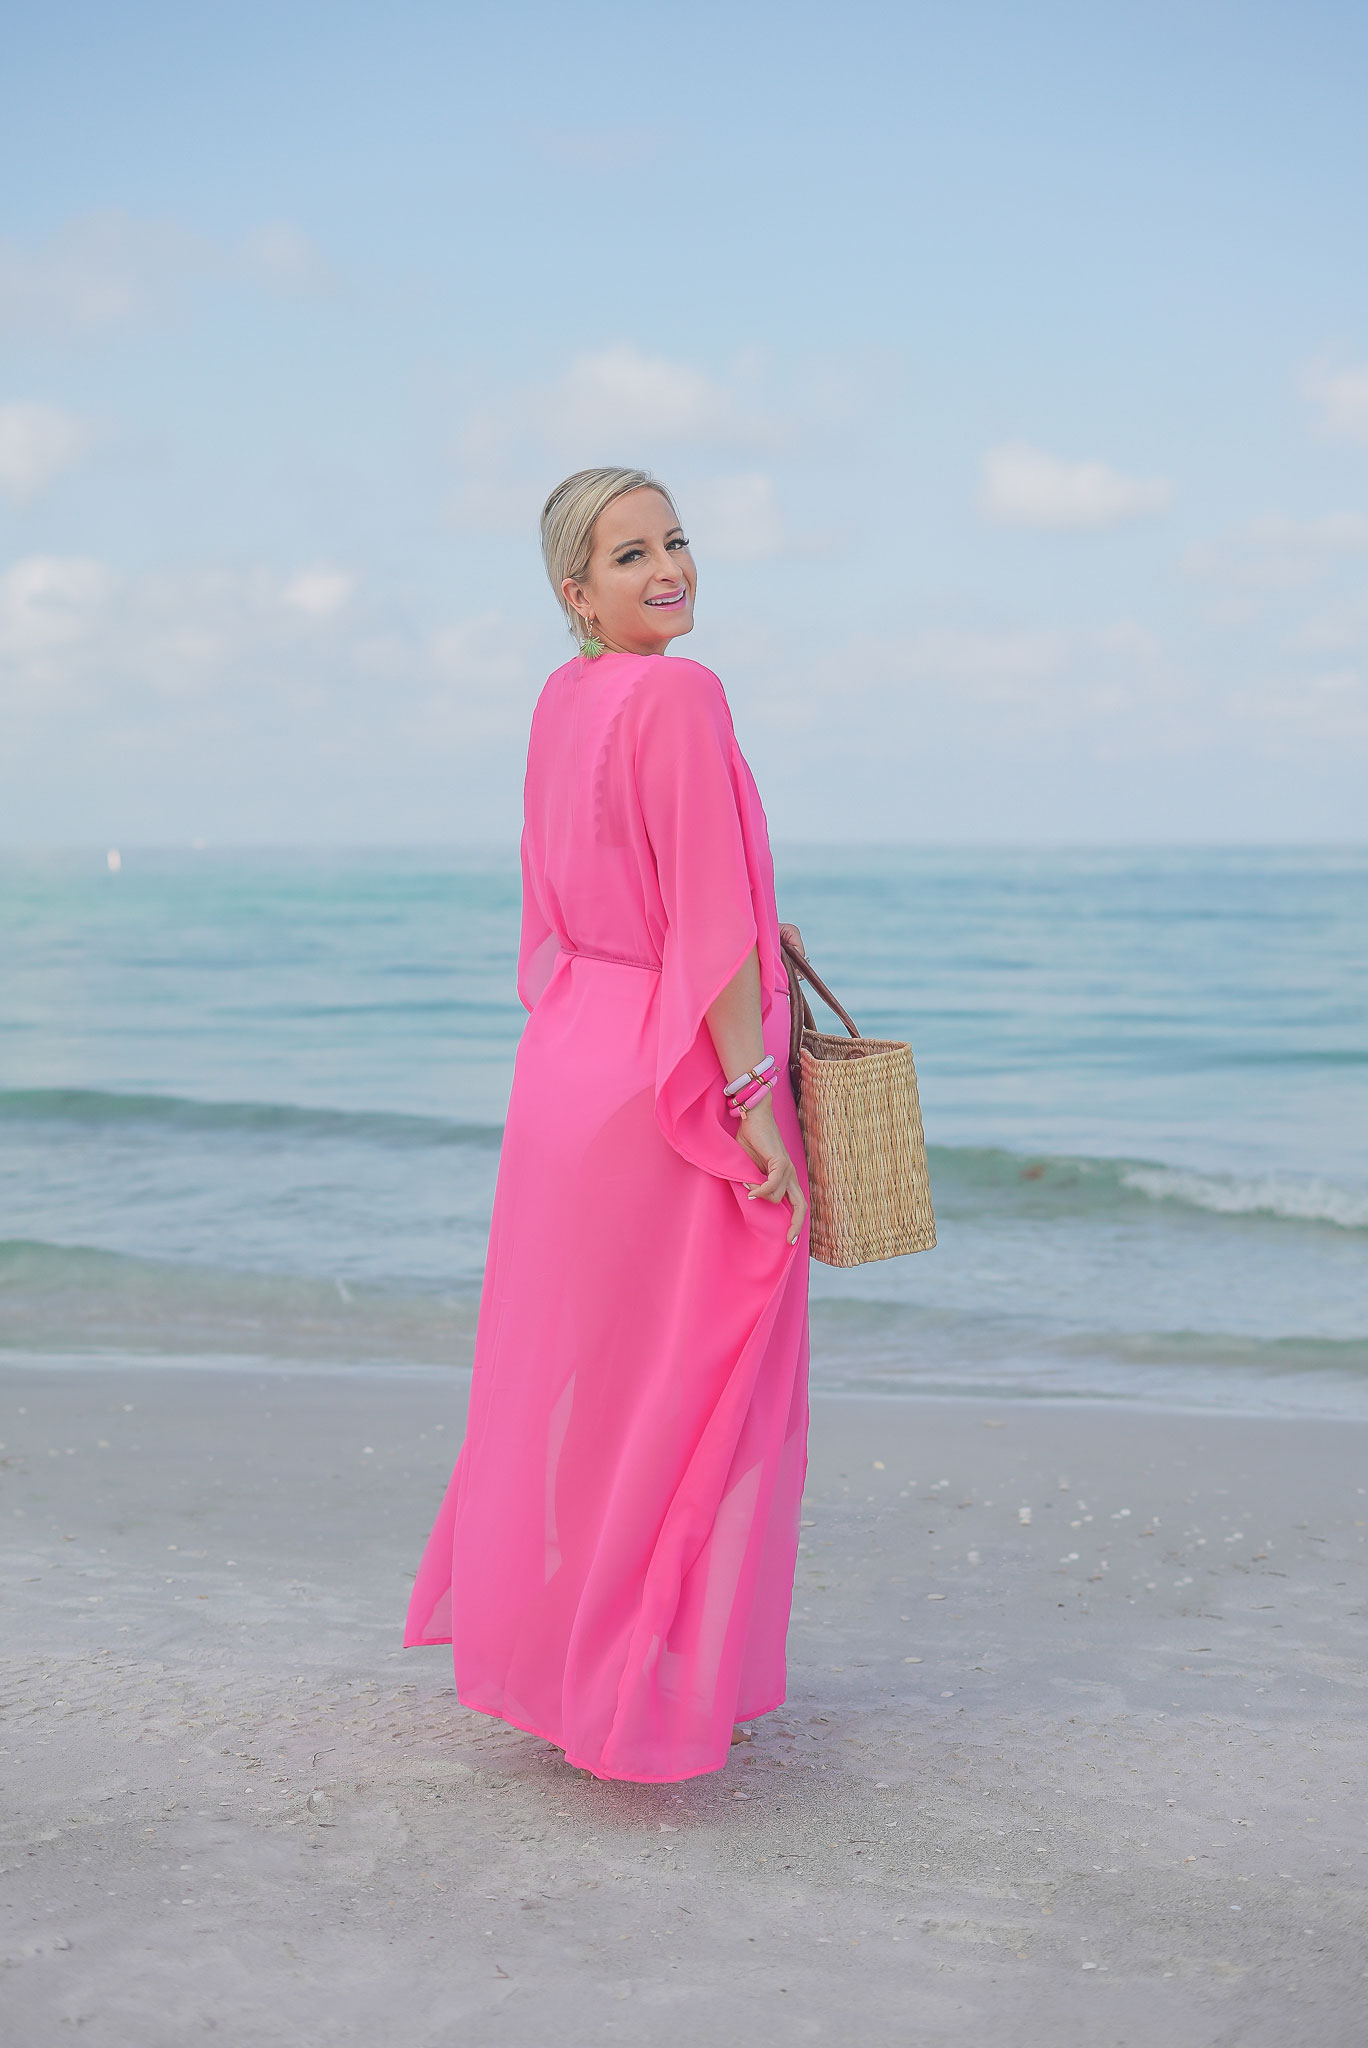 Florida Blogger, Jill DiGioia, The Lovely Flamingo wears Palmetto Palm Leaf earrings from her new beach earring collection with a hot pink beach coverup maxi kimono over a white ruffle one piece and walking on St. Pete Beach.